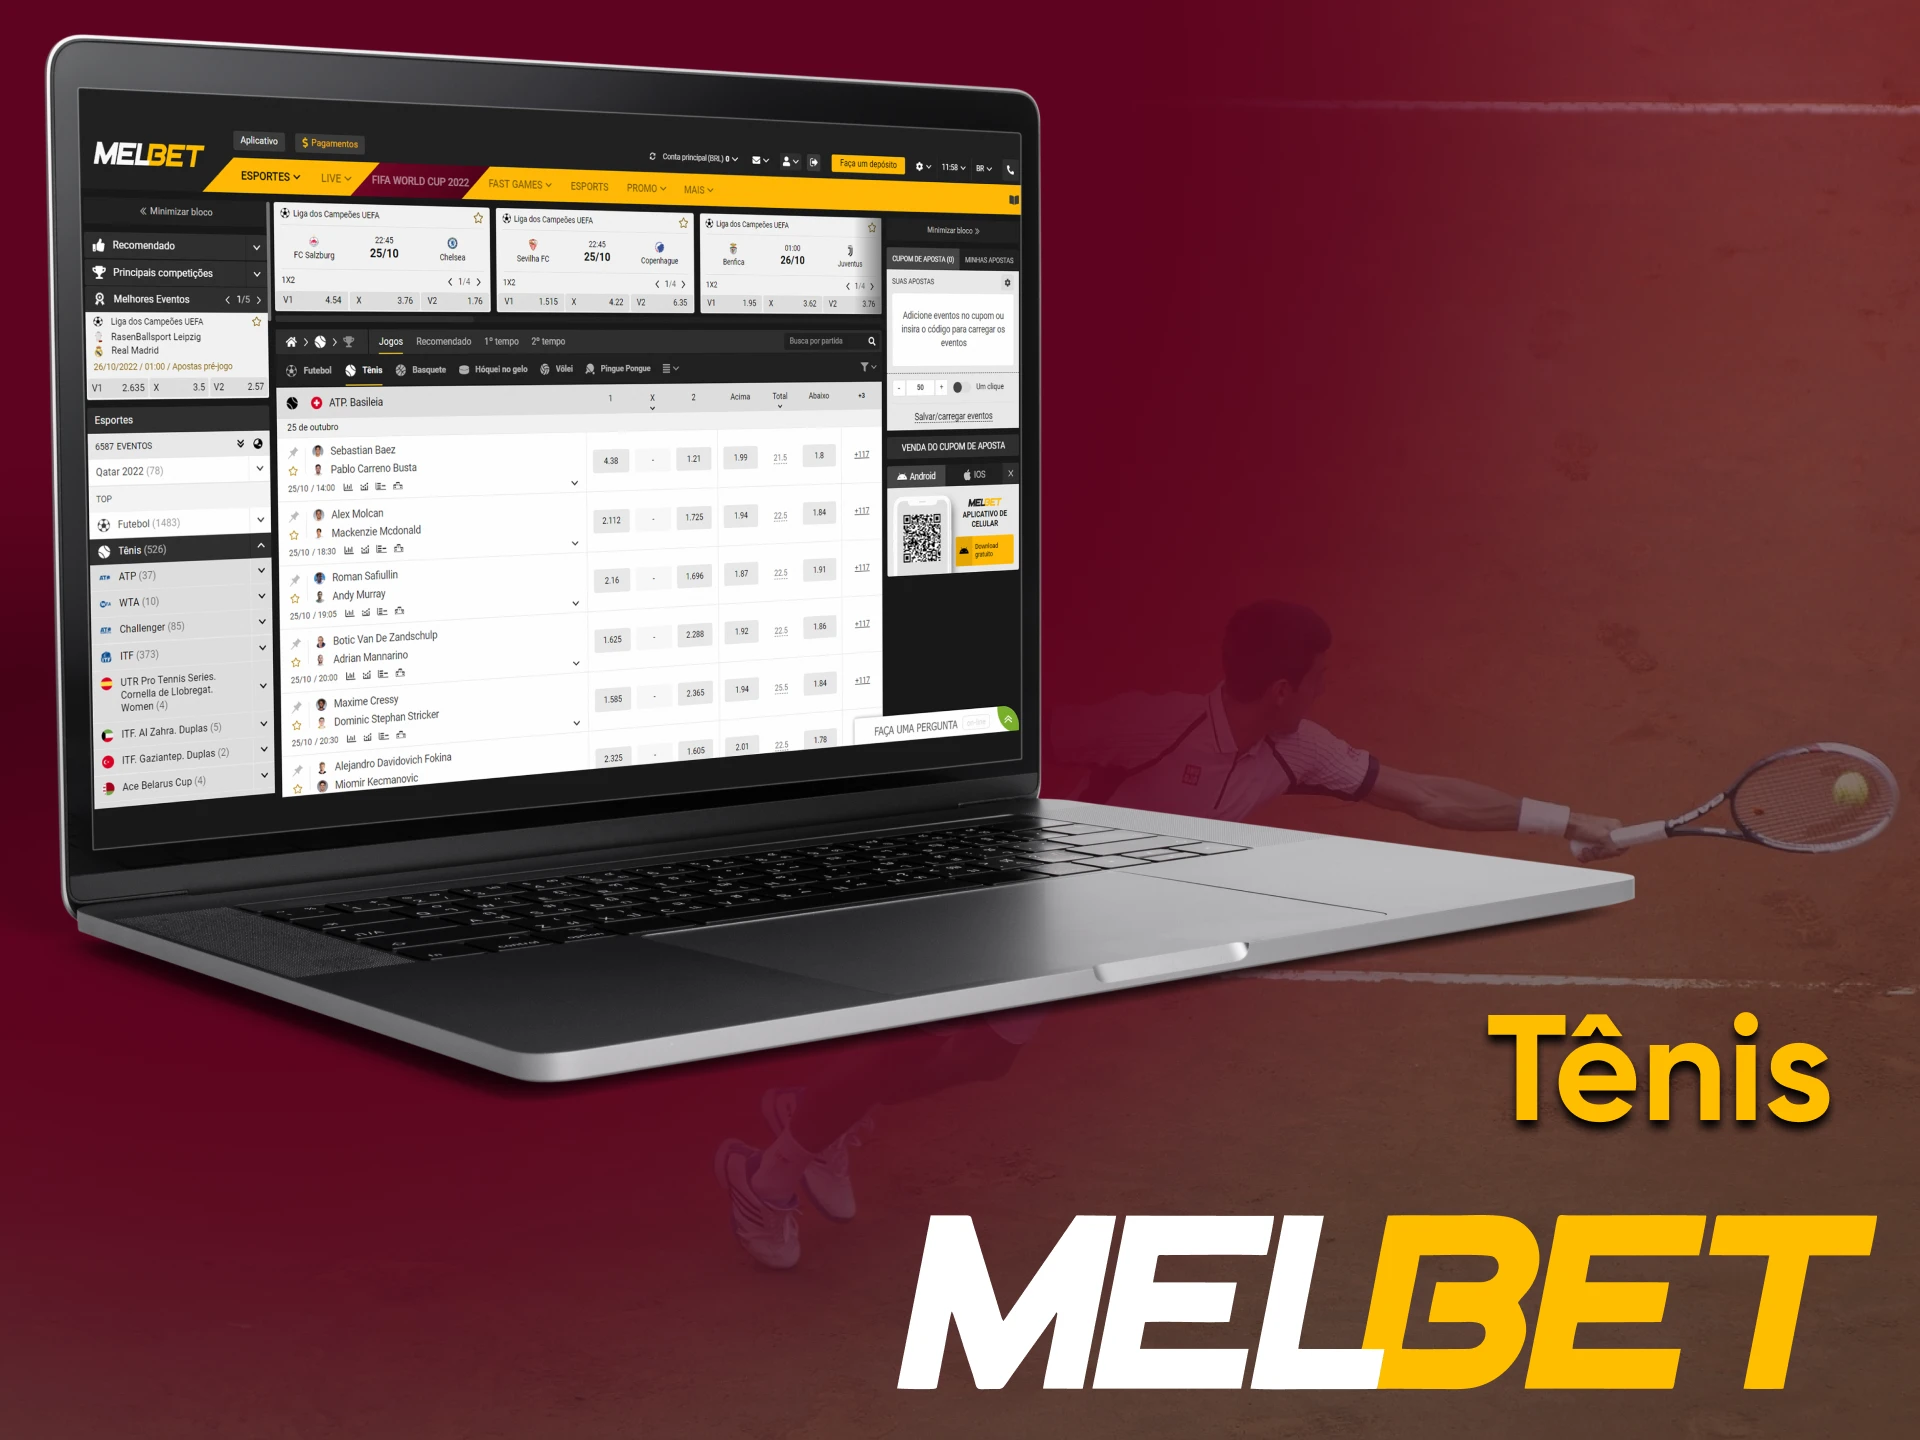 There are bets on tennis from Melbet.